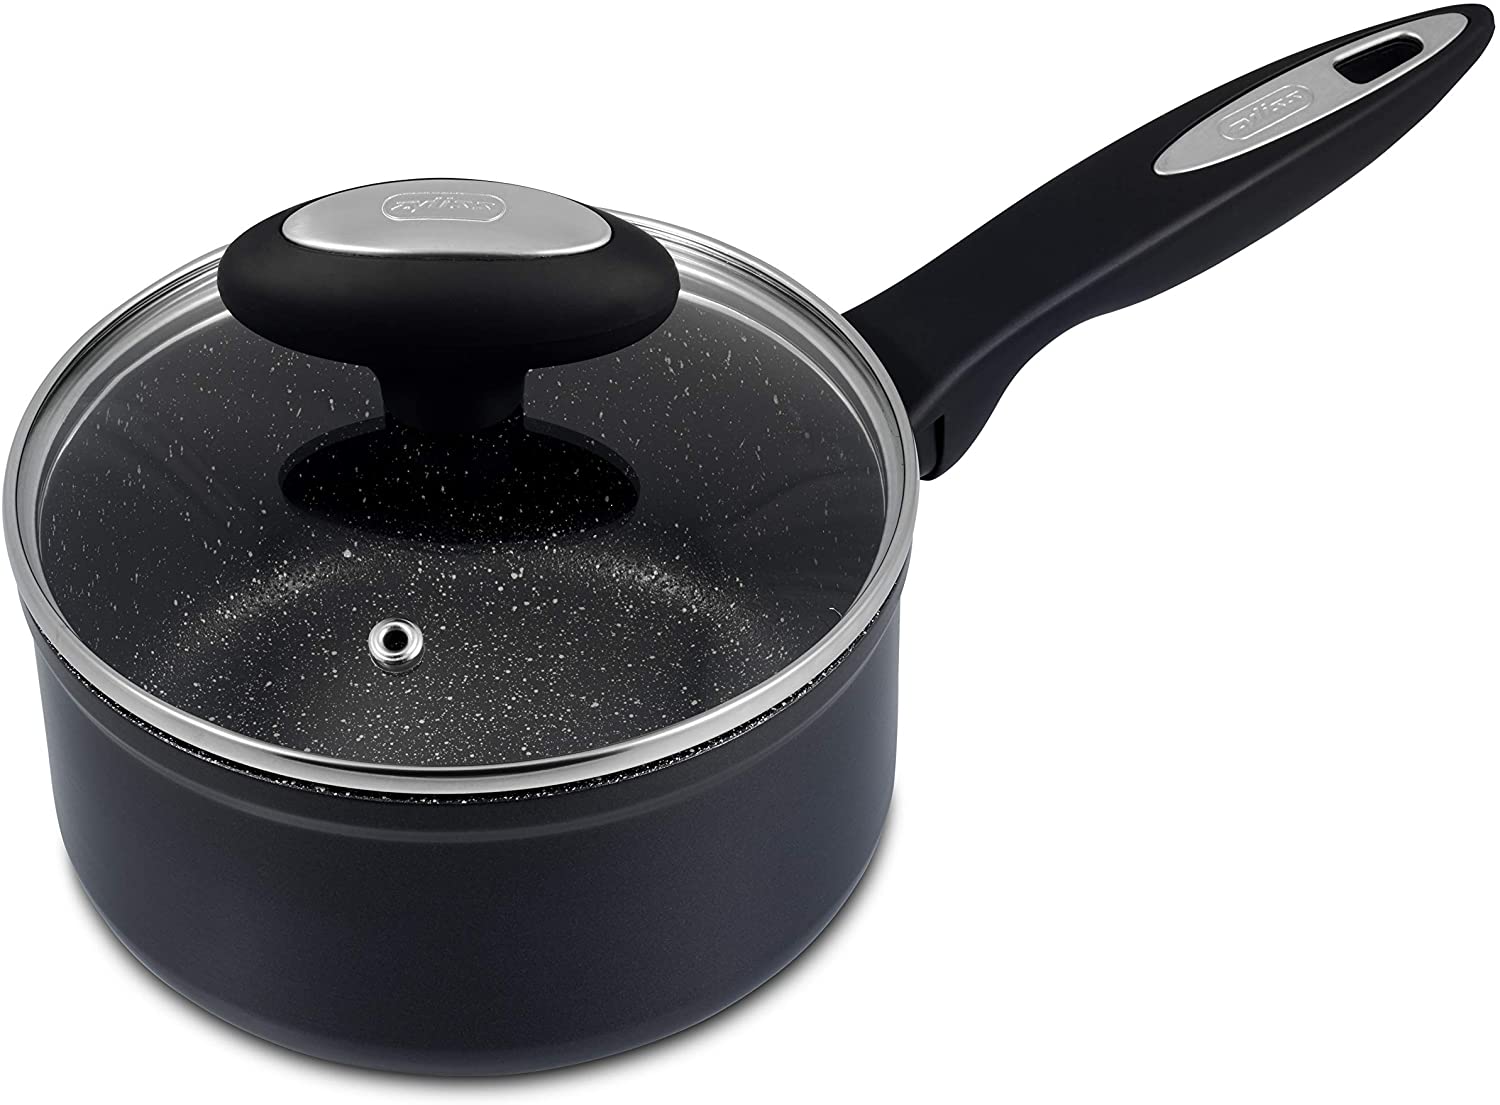 Zyliss E980138 Cook Non-Stick Coating Pots Forged Aluminium Bakelite Soft Touch SS Black